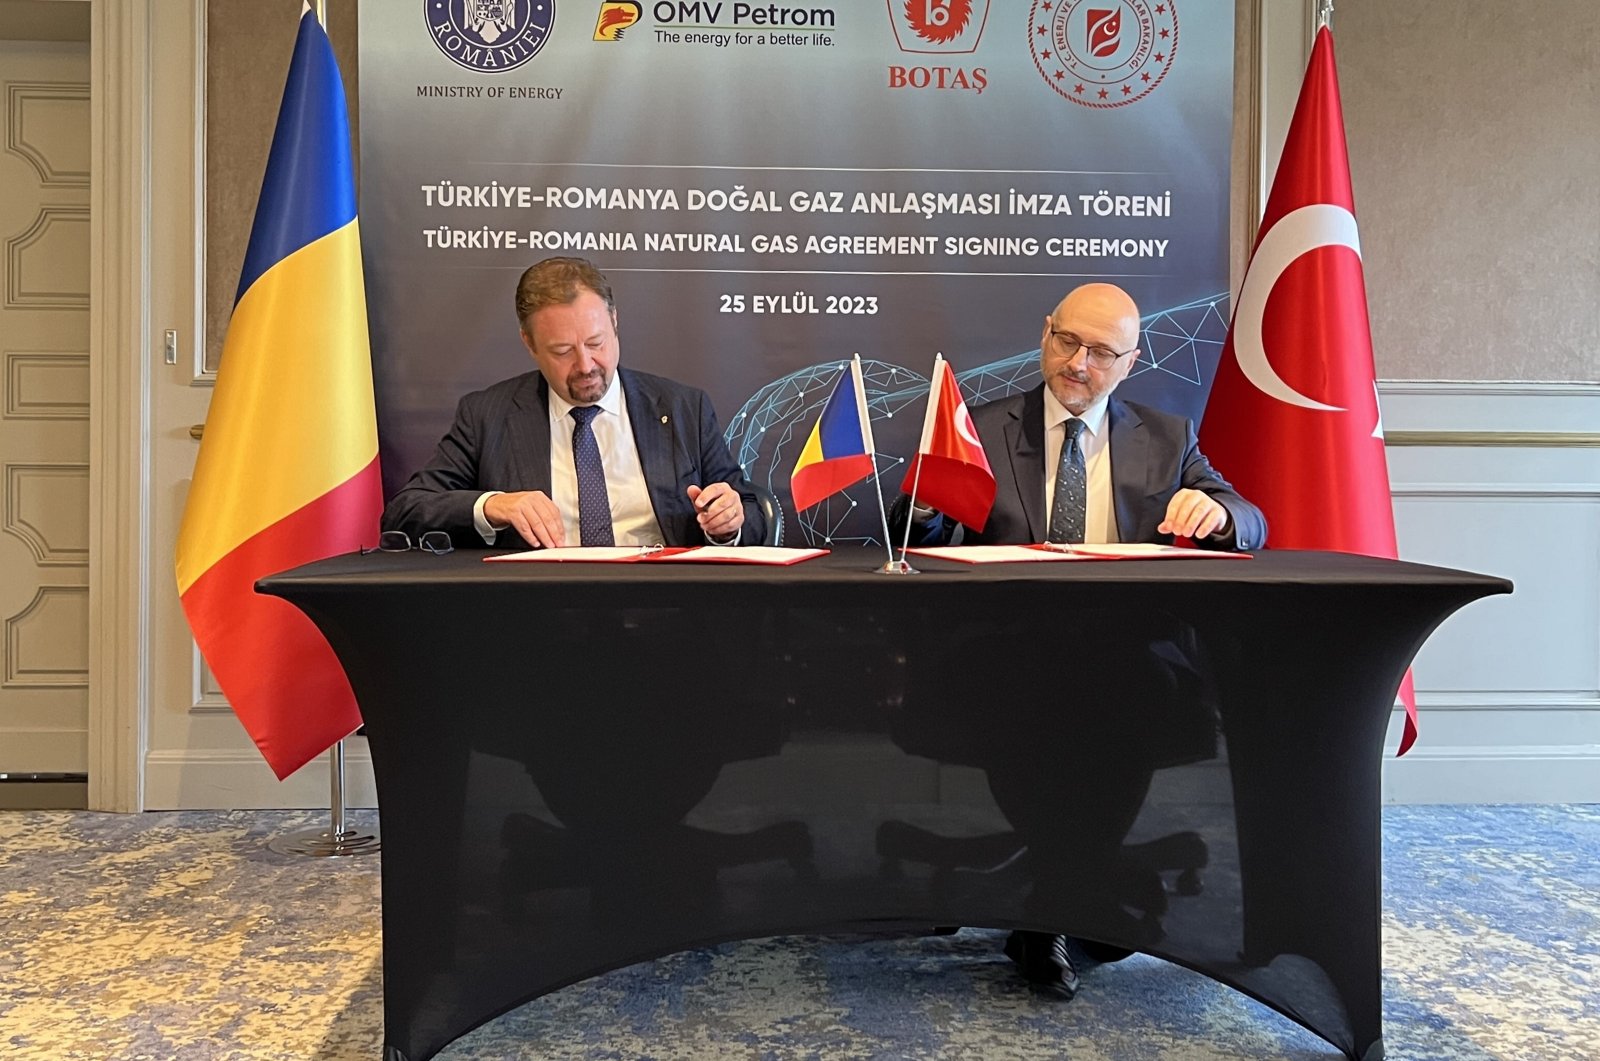 BOTAŞ General Manager Burhan Özcan (R) and OMV Petrom Executive Board member Franck Neel sign a natural gas deal in this photo provided on Sept. 27, 2023. (Courtesy of BOTAŞ)